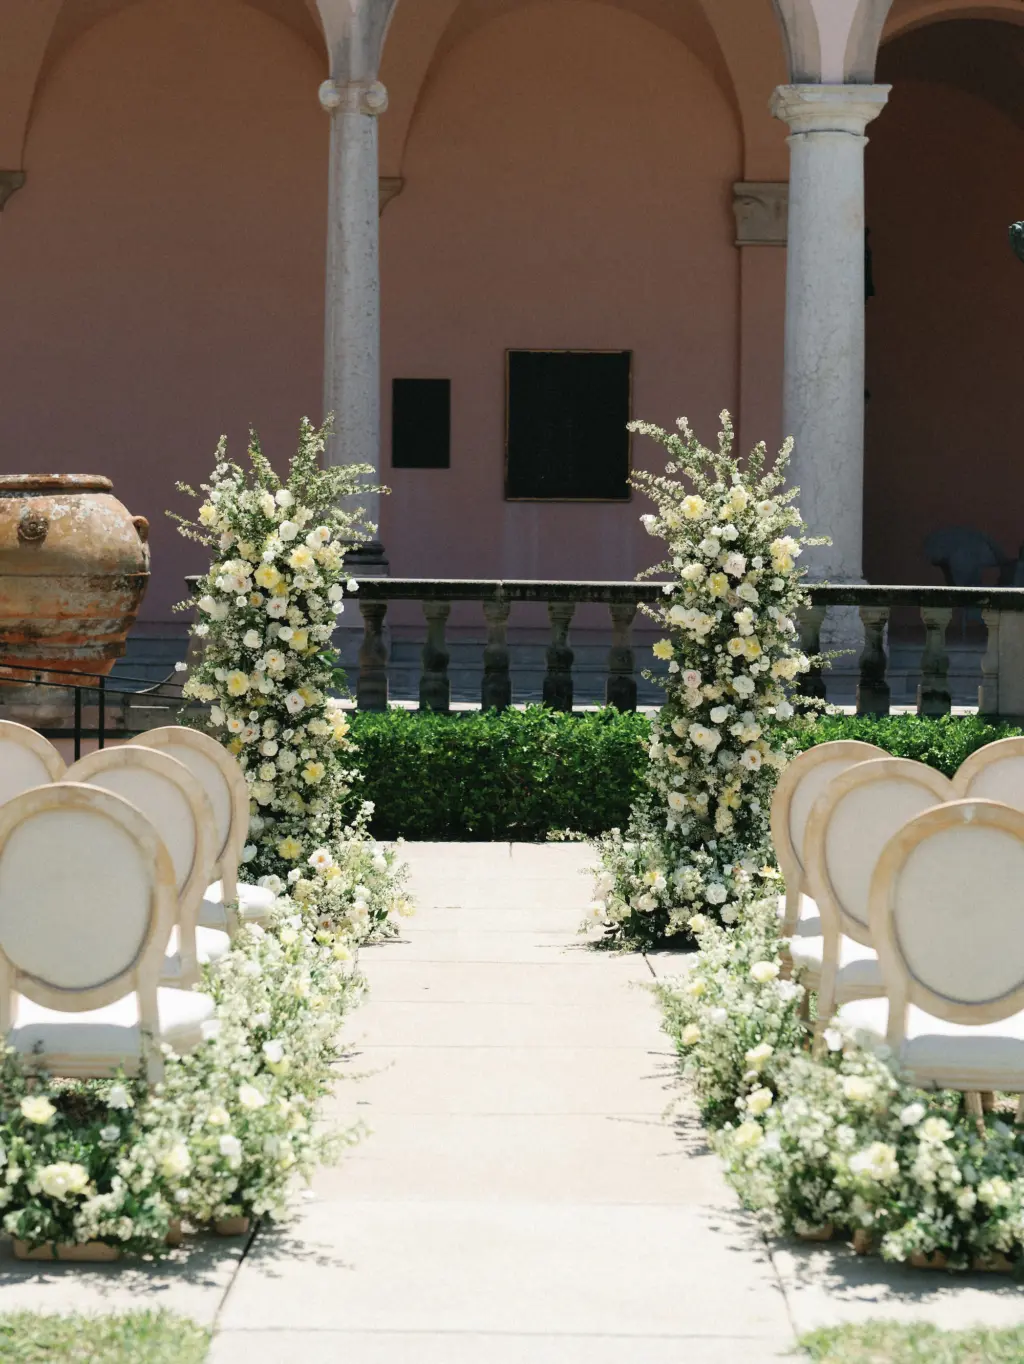 Yellow and White Roses with Greenery | Italian Wedding Outdoor Ceremony Floral Columns Arch Inspiration